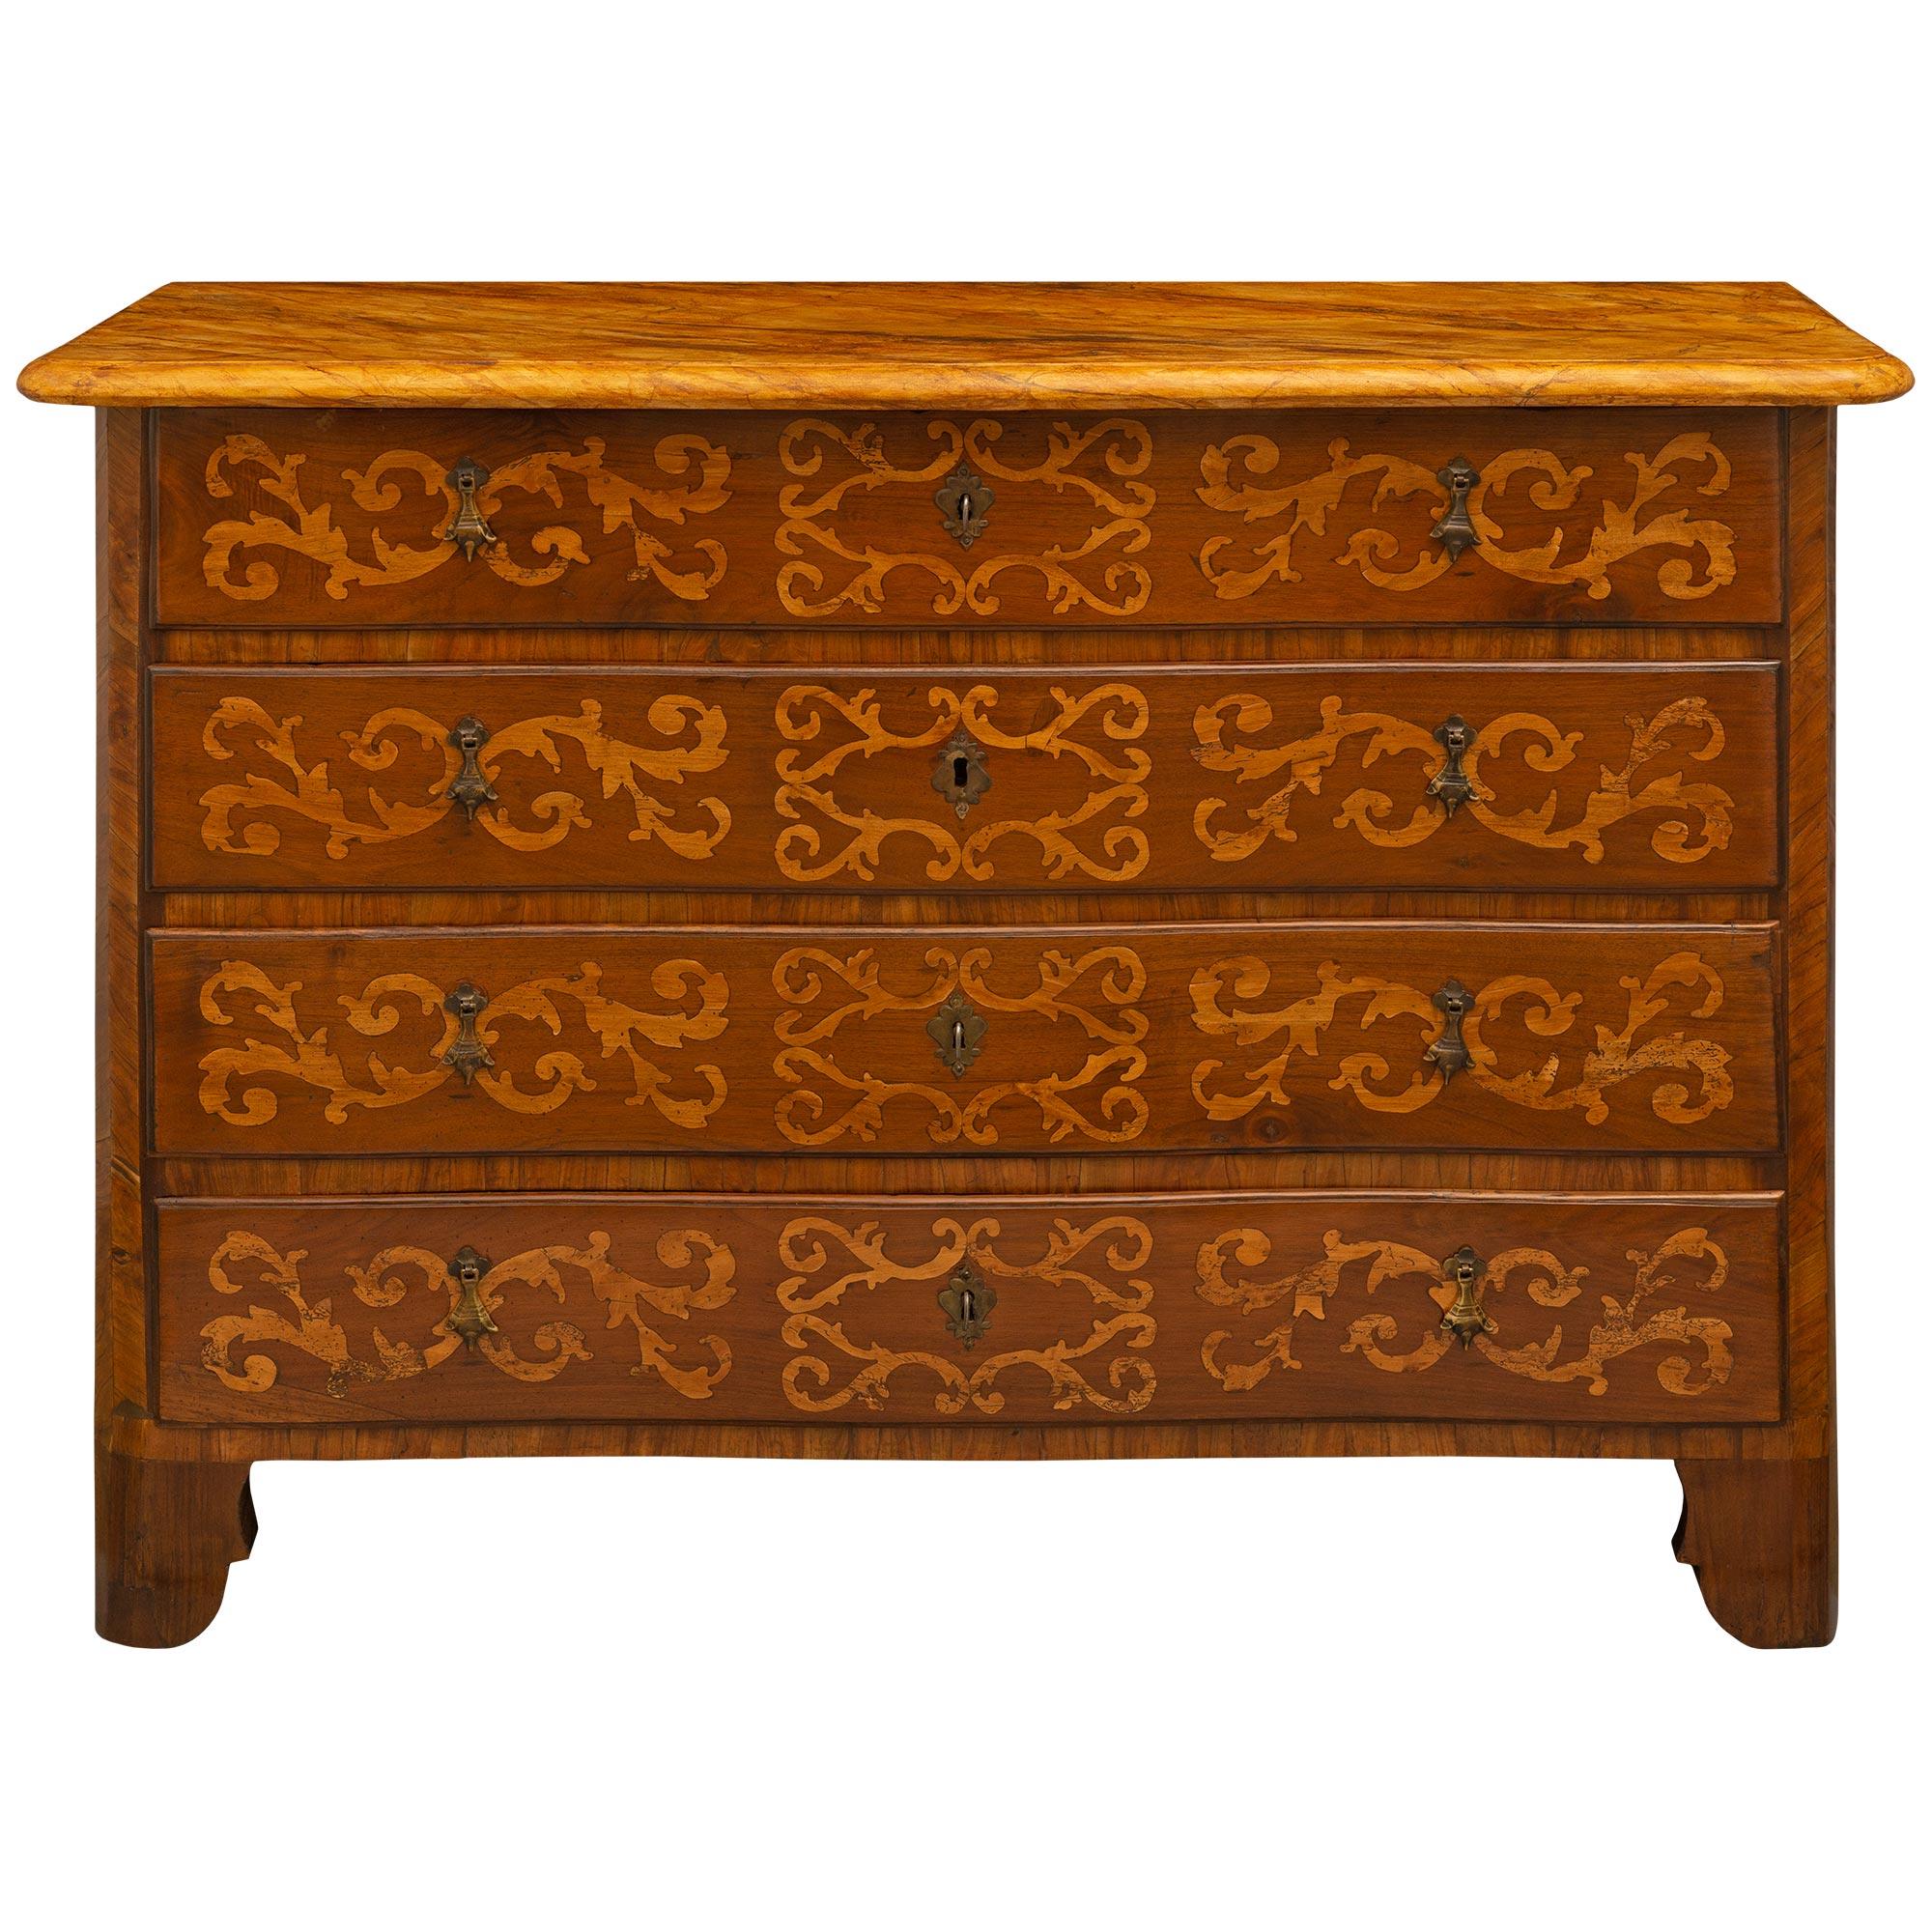 Italian Early 18th Century Louis XIV Period Four-Drawer Walnut Chest For Sale 7